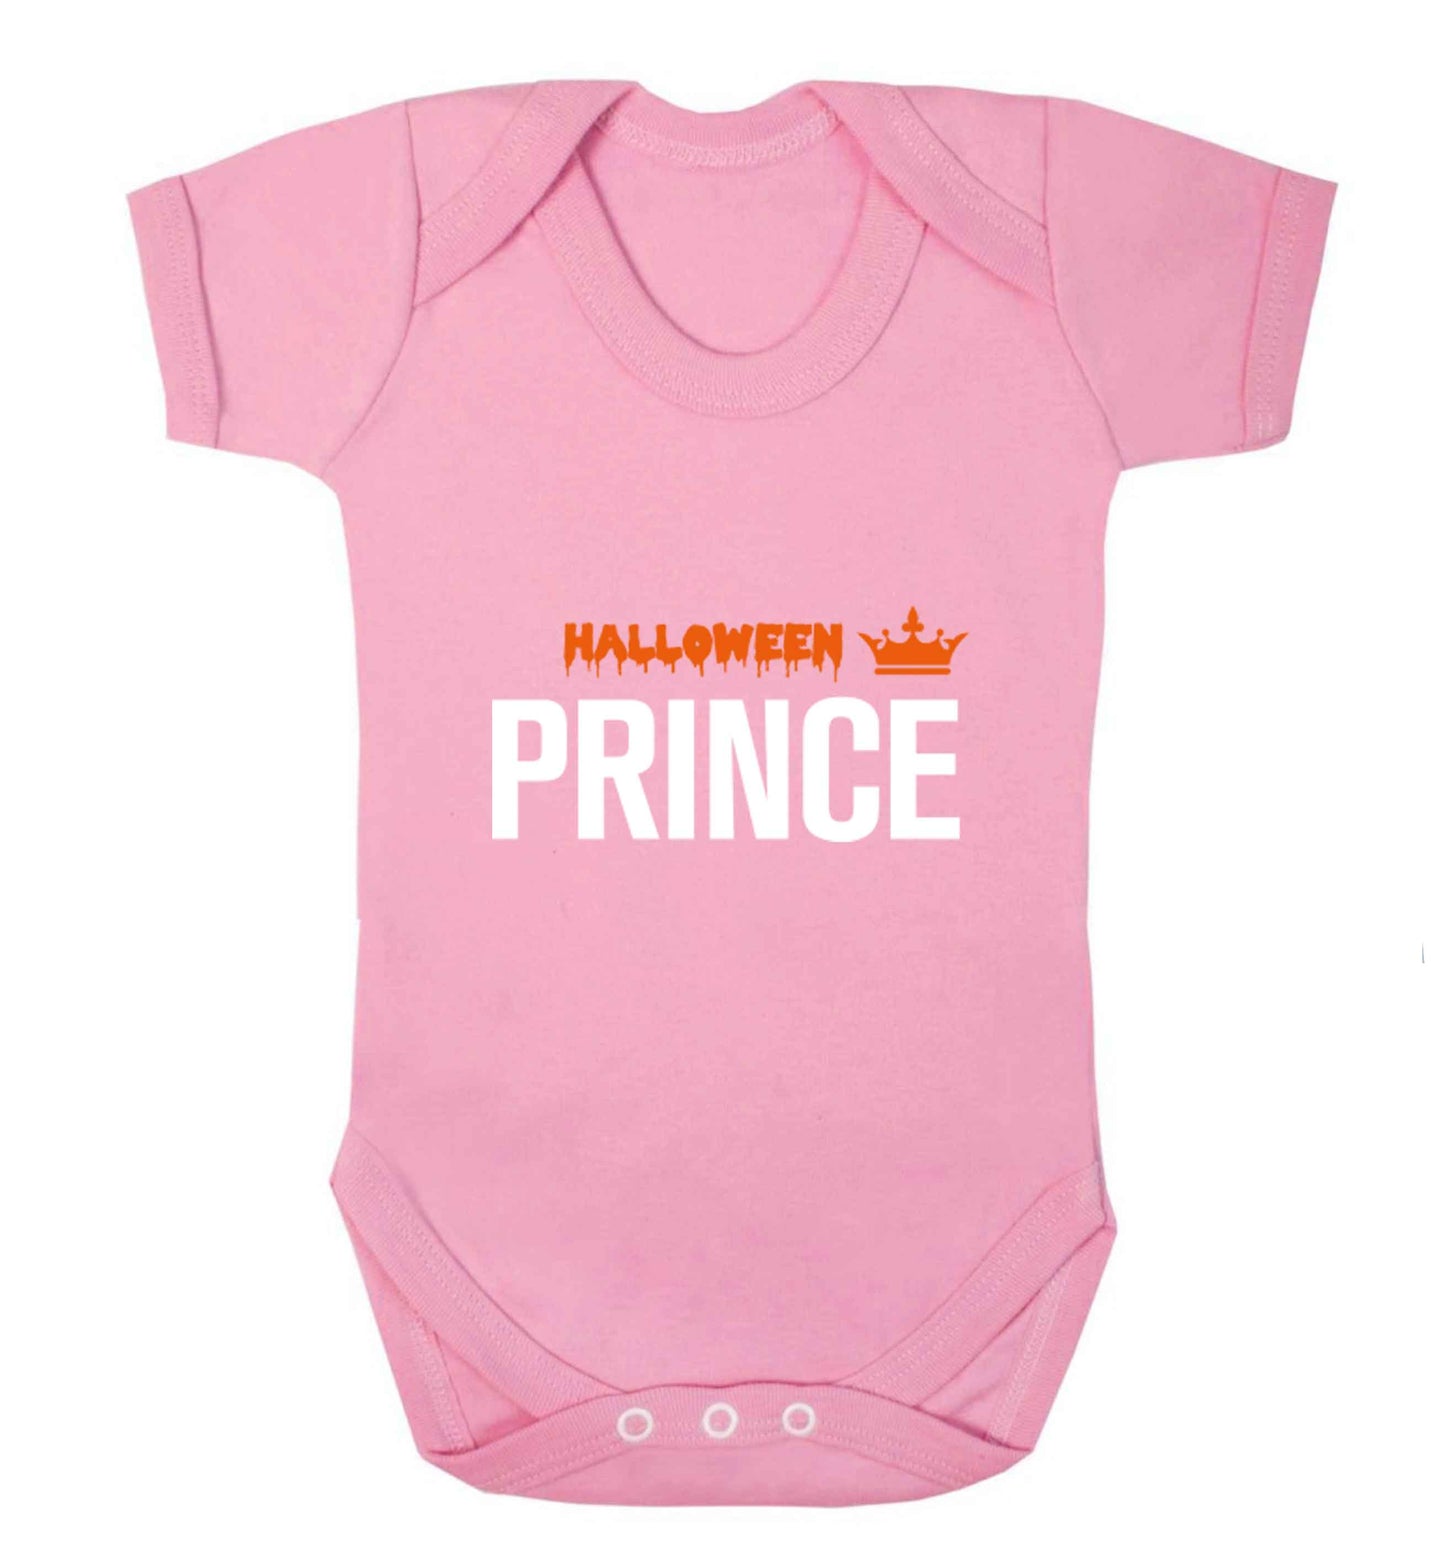 Halloween prince baby vest pale pink 18-24 months